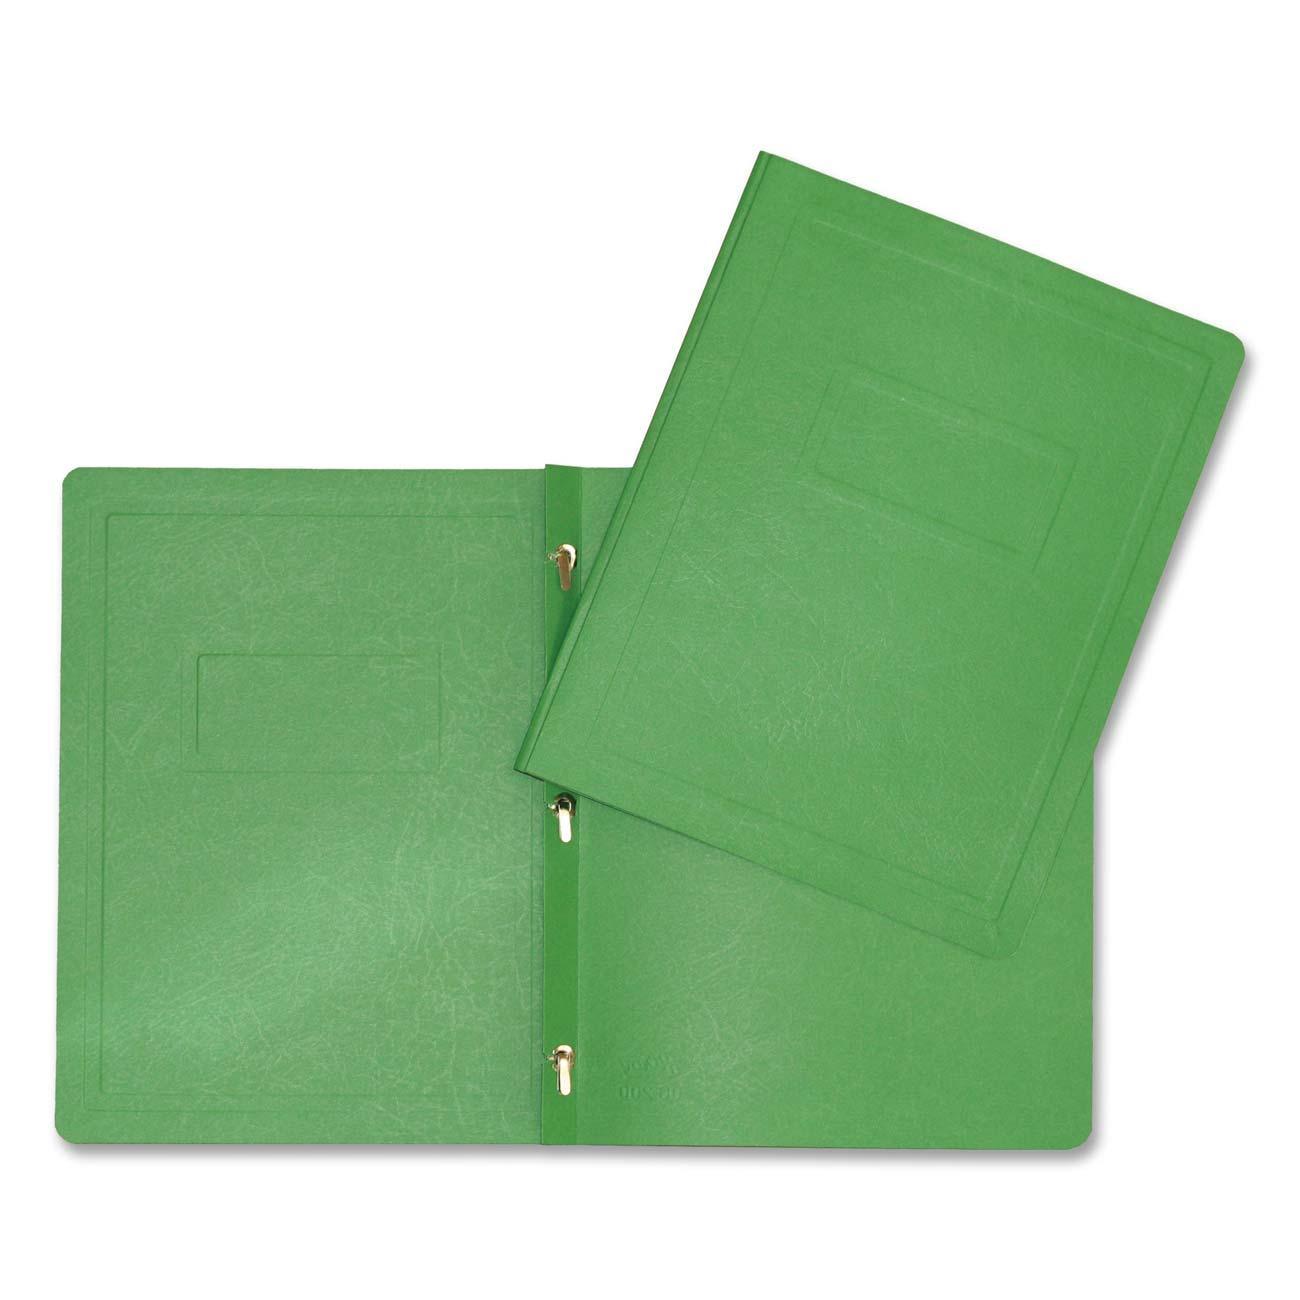 Hilroy Brief Cover, Green